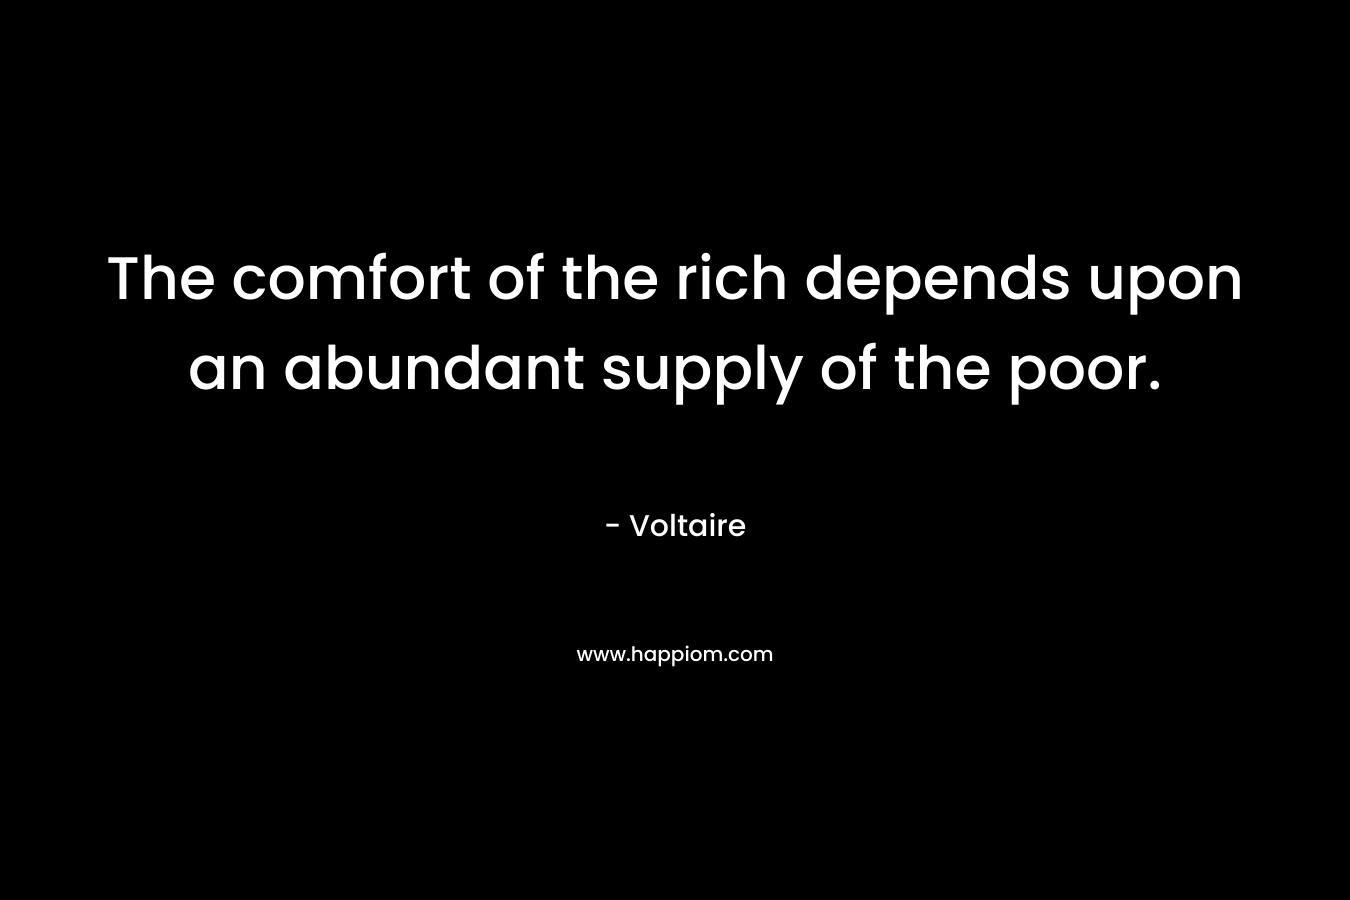 The comfort of the rich depends upon an abundant supply of the poor. – Voltaire